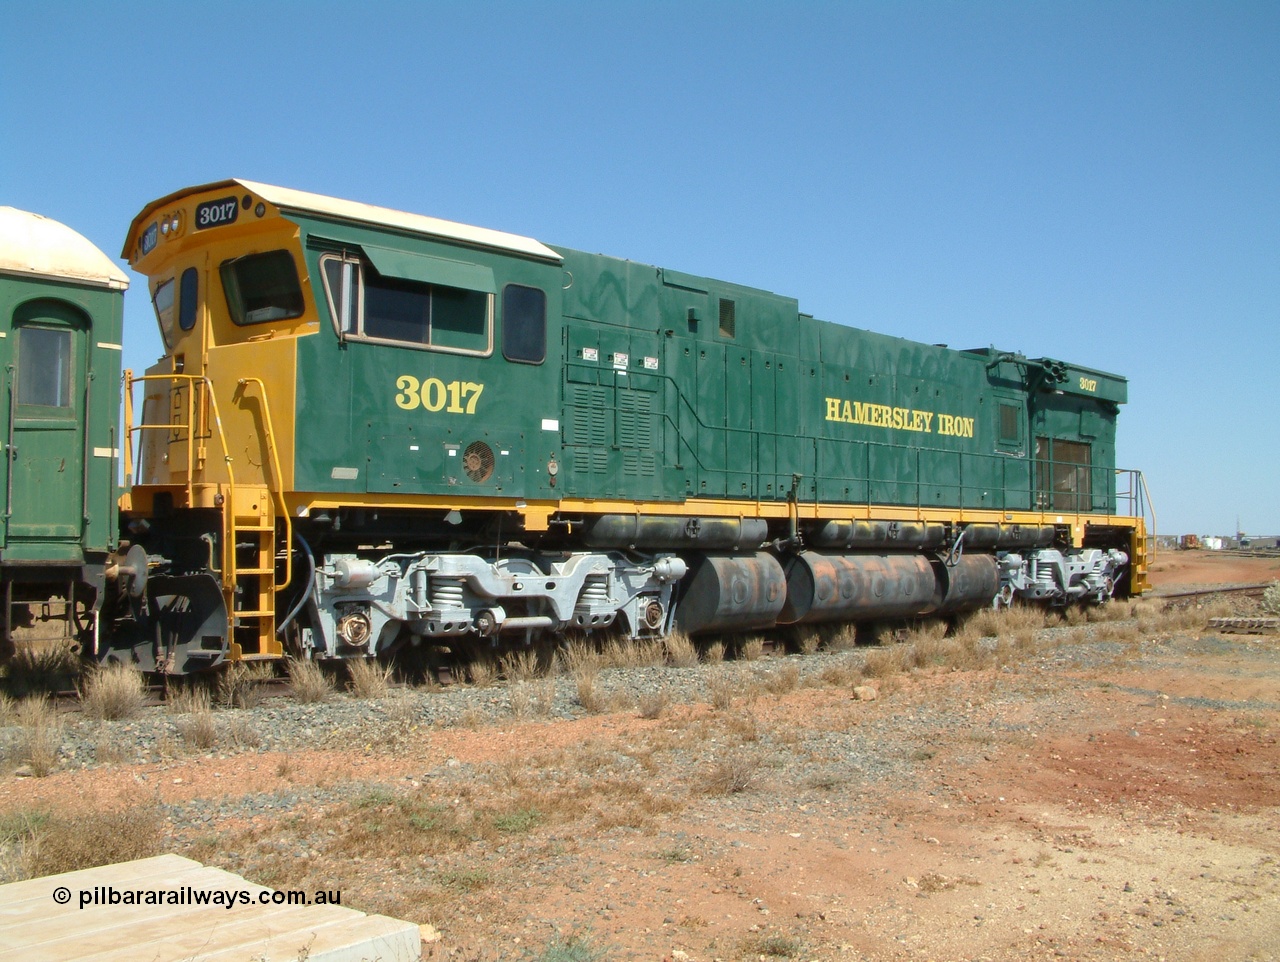 041014 142225
Pilbara Railways Historical Society, Comeng WA ALCo rebuild C636R locomotive 3017 serial WA-135-C-6043-04. The improved Pilbara cab was fitted as part of the rebuild in April 1985. Donated to Society in 1996. 14th October 2004.
Keywords: 3017;Comeng-WA;ALCo;C636R;WA-135-C-6043-04;rebuild;